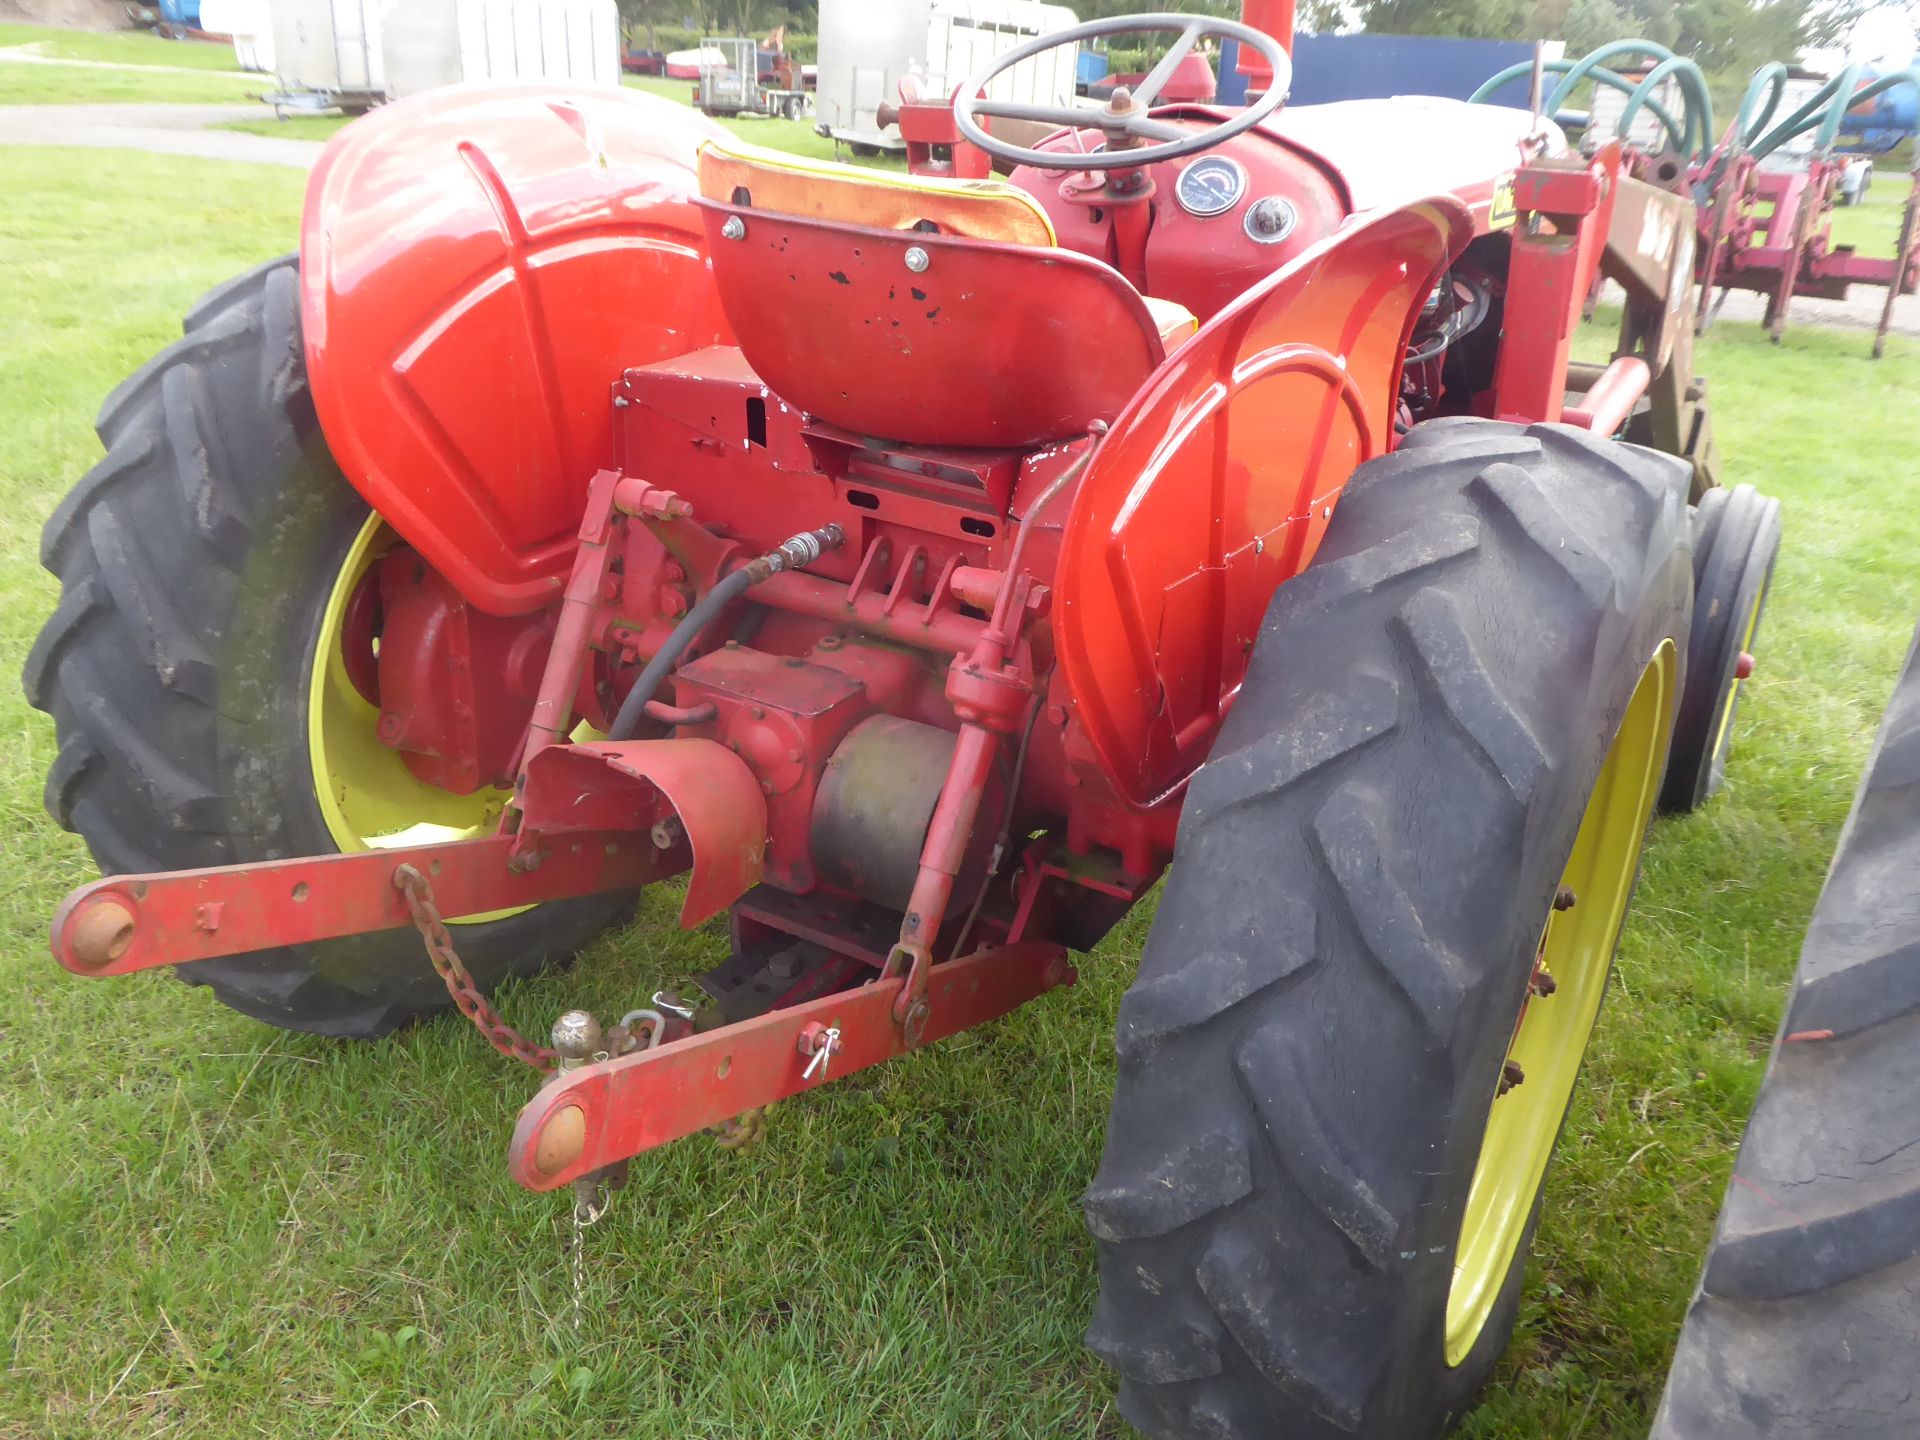 1961 David Brown 880 Implematic tractor with loader, tines and bucket, gwo NO VAT - Image 4 of 5